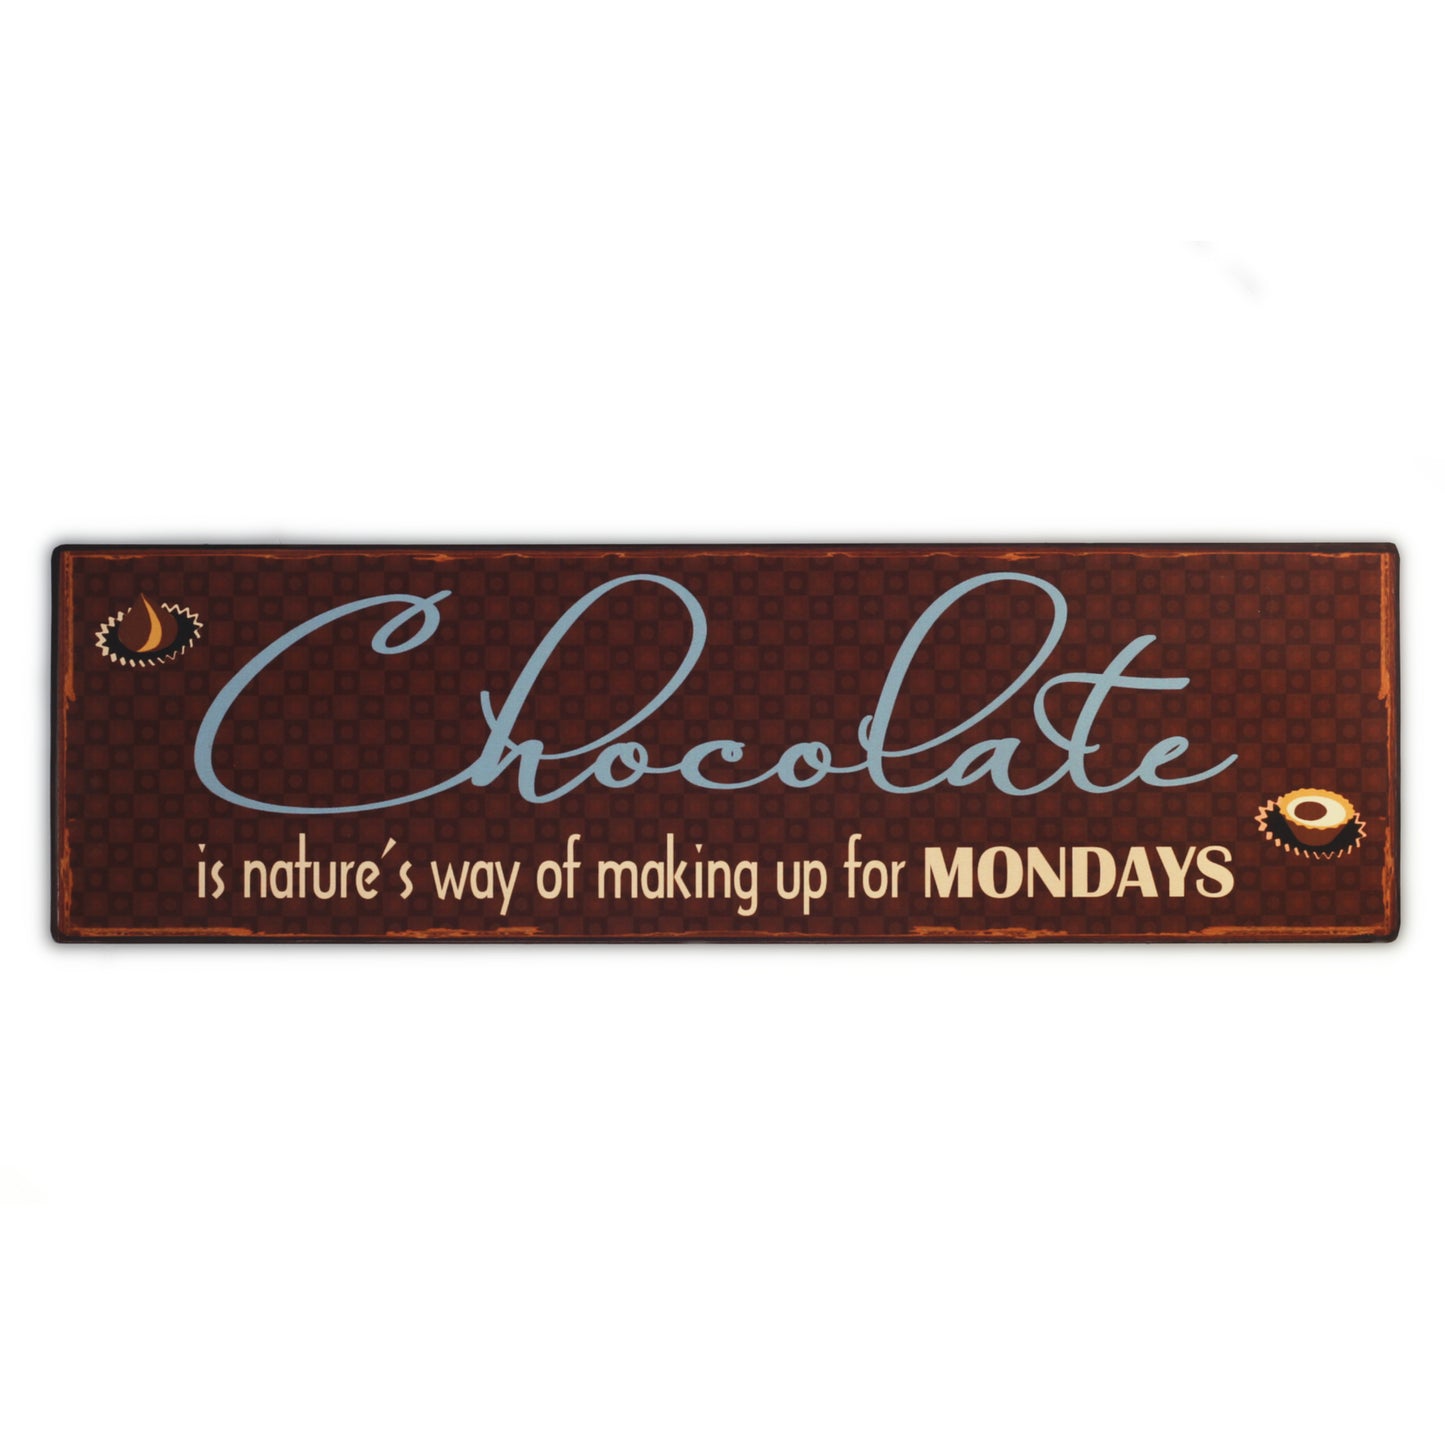 Blechschild: Chocolate is nature's way of making up for Mondays